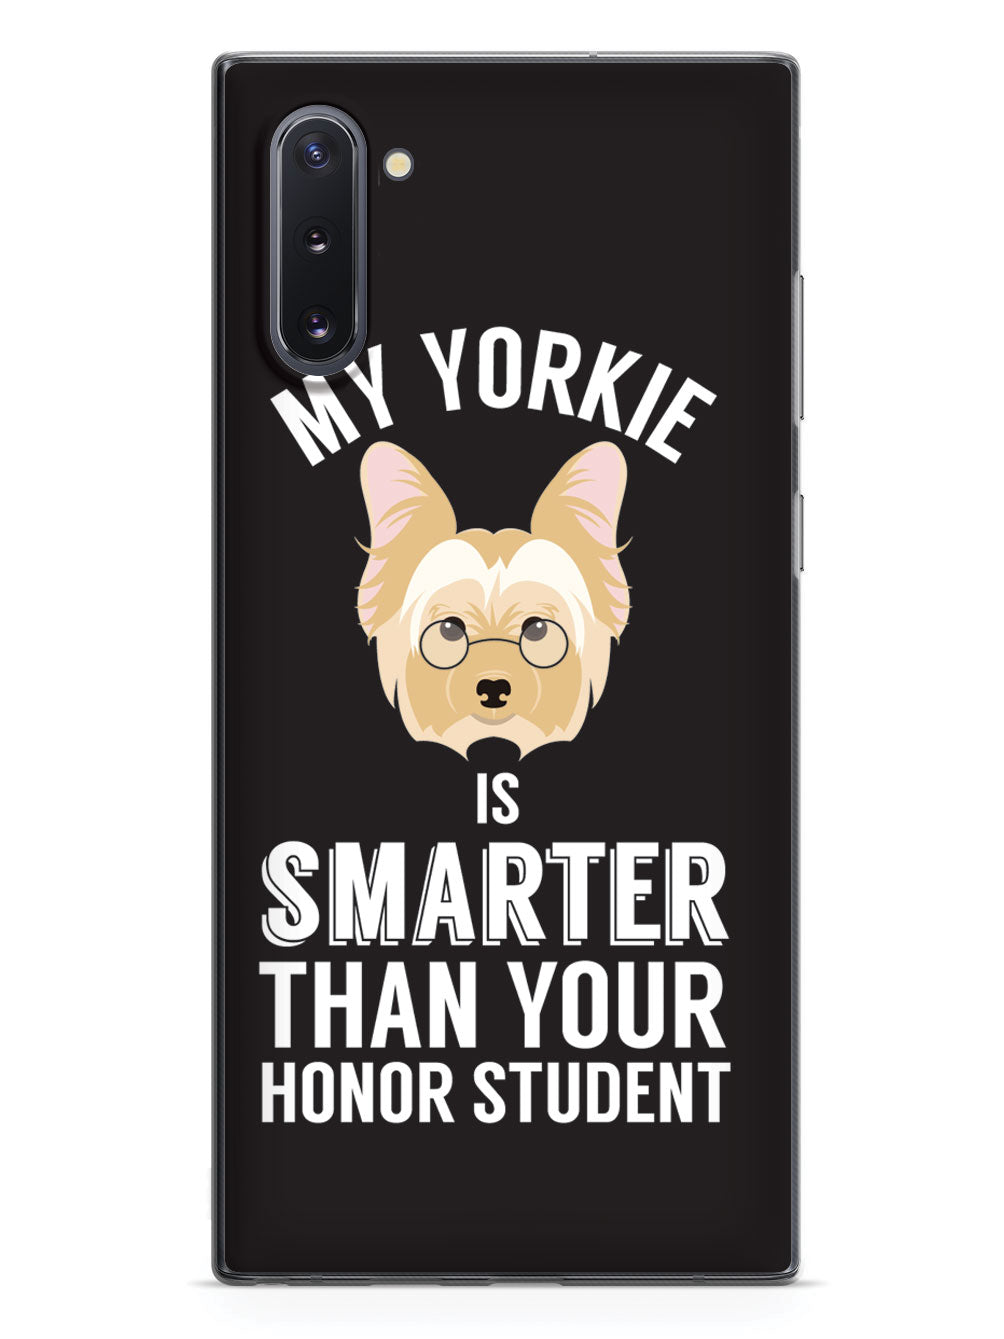 Smarter Than Your Honor Student - Yorkie Case